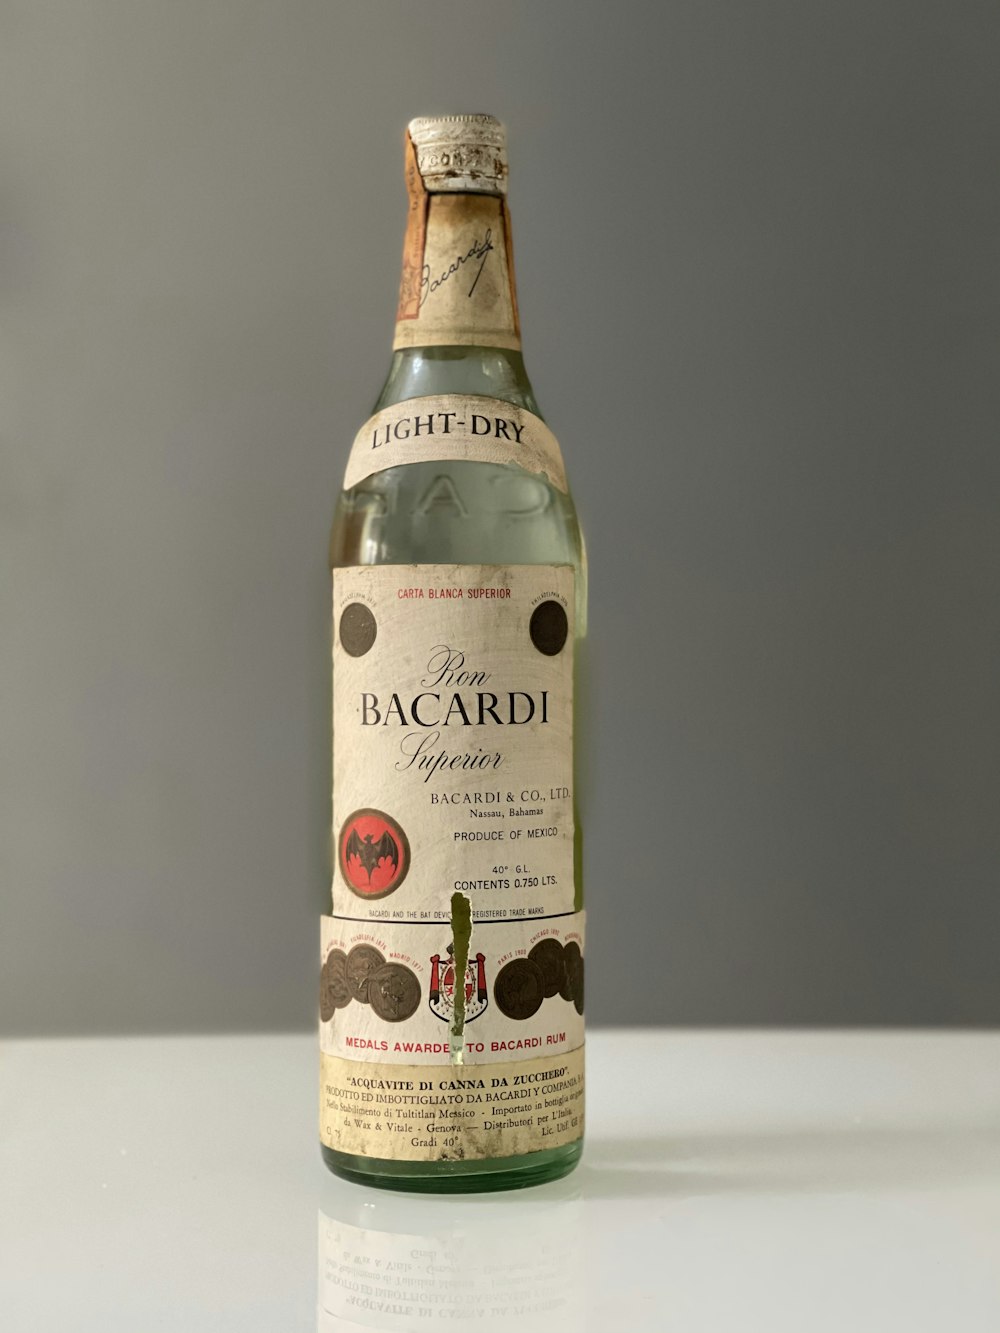 a bottle of bacardi wine sitting on a table